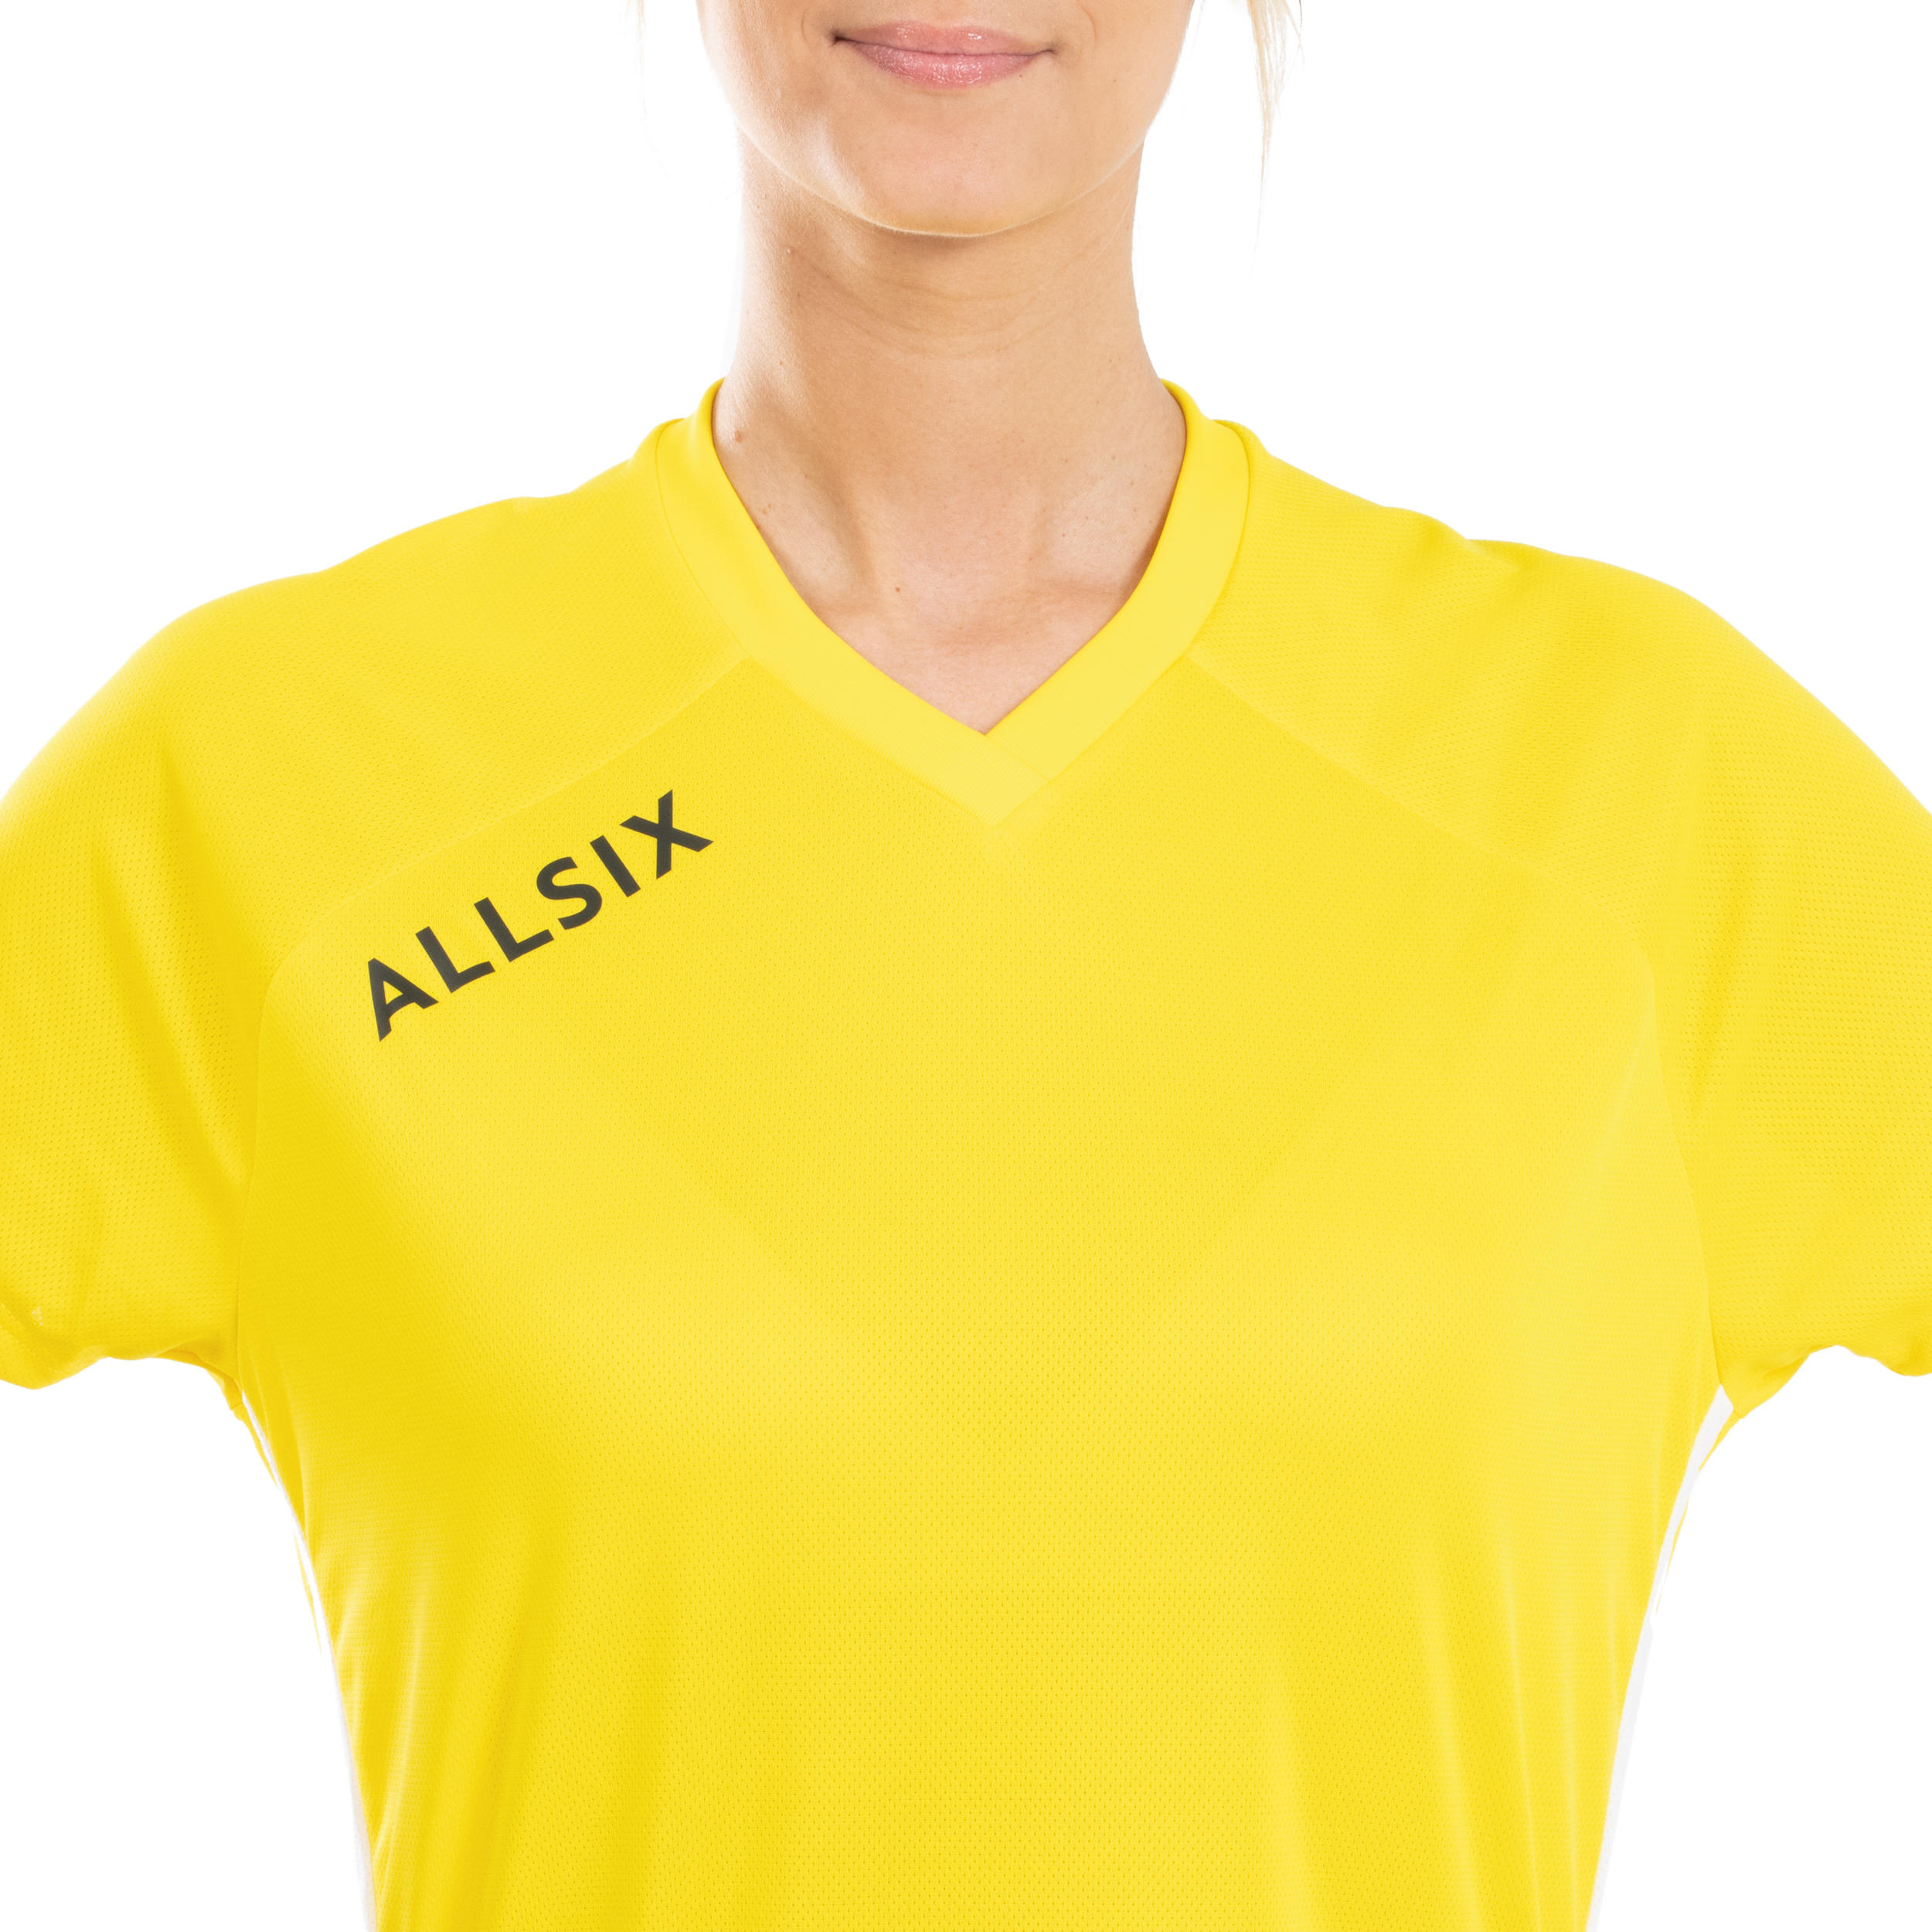 V100 Women's Volleyball Jersey - Yellow 7/8